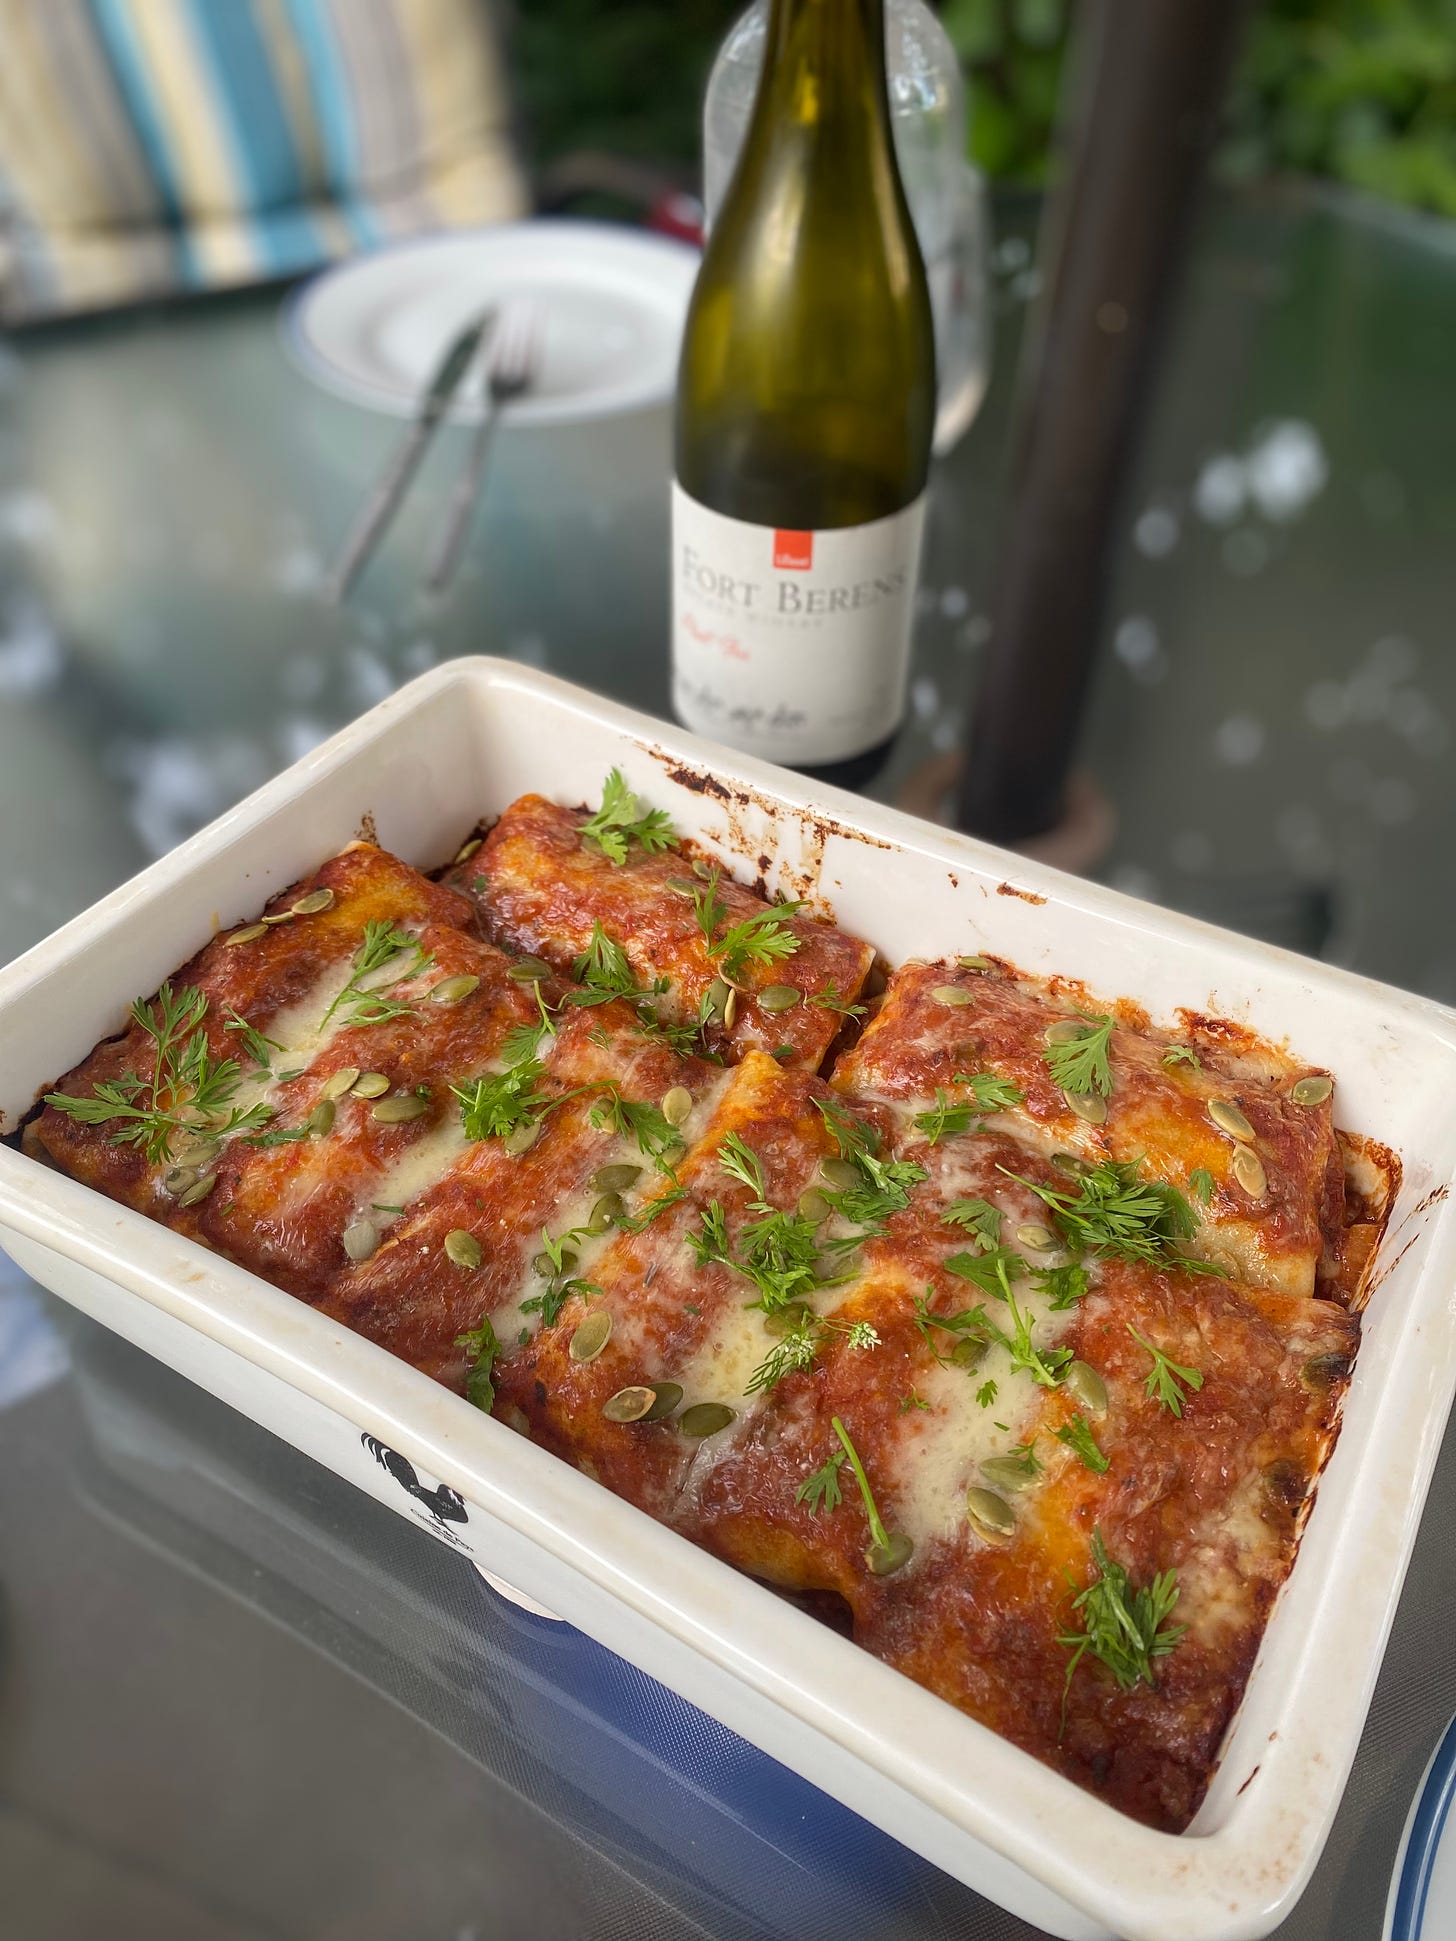 A white rectangular dish of enchiladas in red sauce, melted white cheddar over top. Sprinkled across it are pepitas and cilantro. In the background is a bottle of Fort Berens pinot gris.